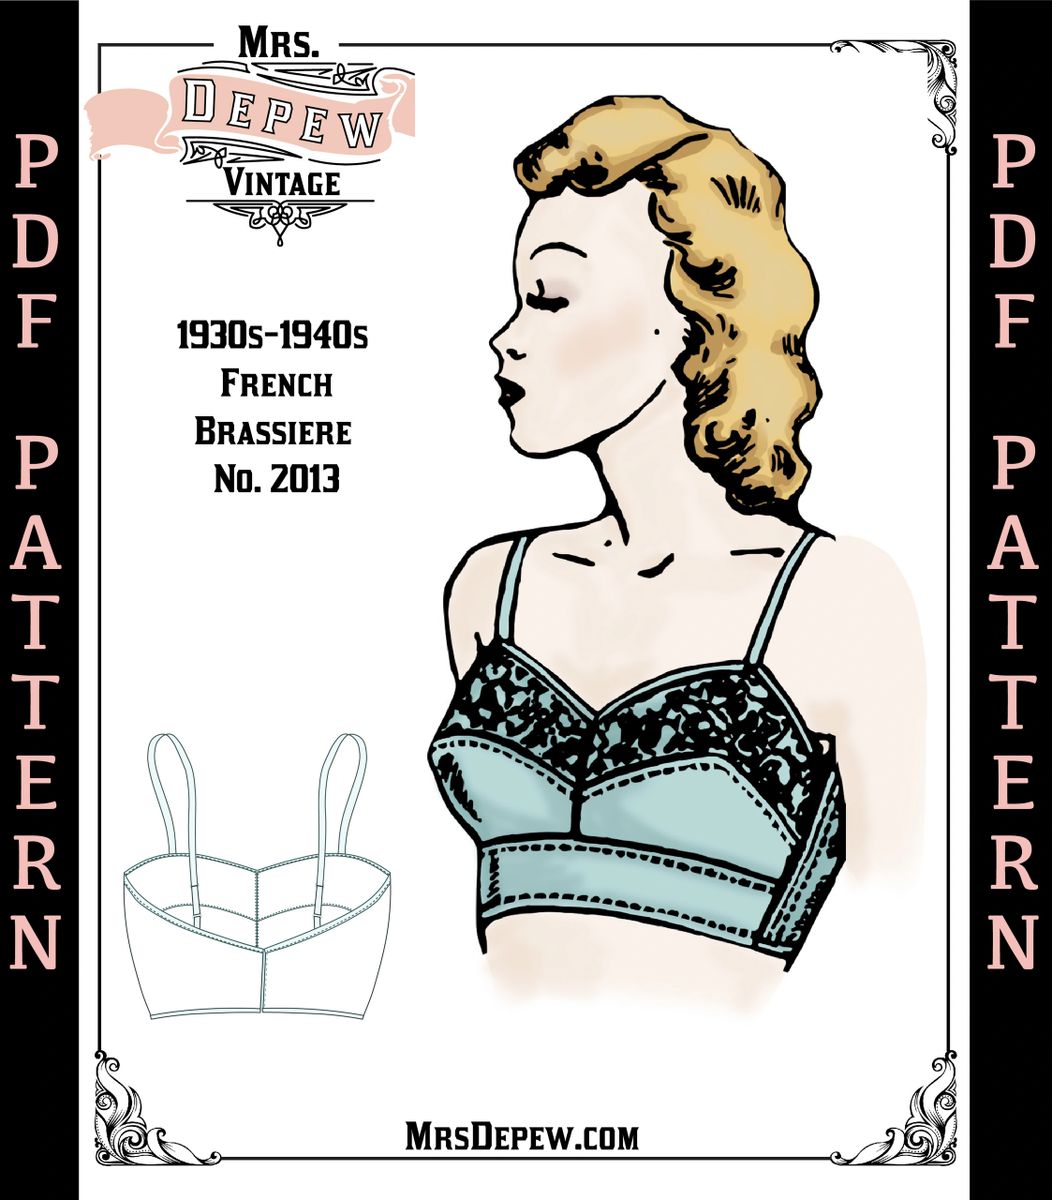 Vintage Sewing Pattern Ladies 1930s - 1940s French Bra Printable Multisize  Depew #2013 31-49 Bust -INSTANT